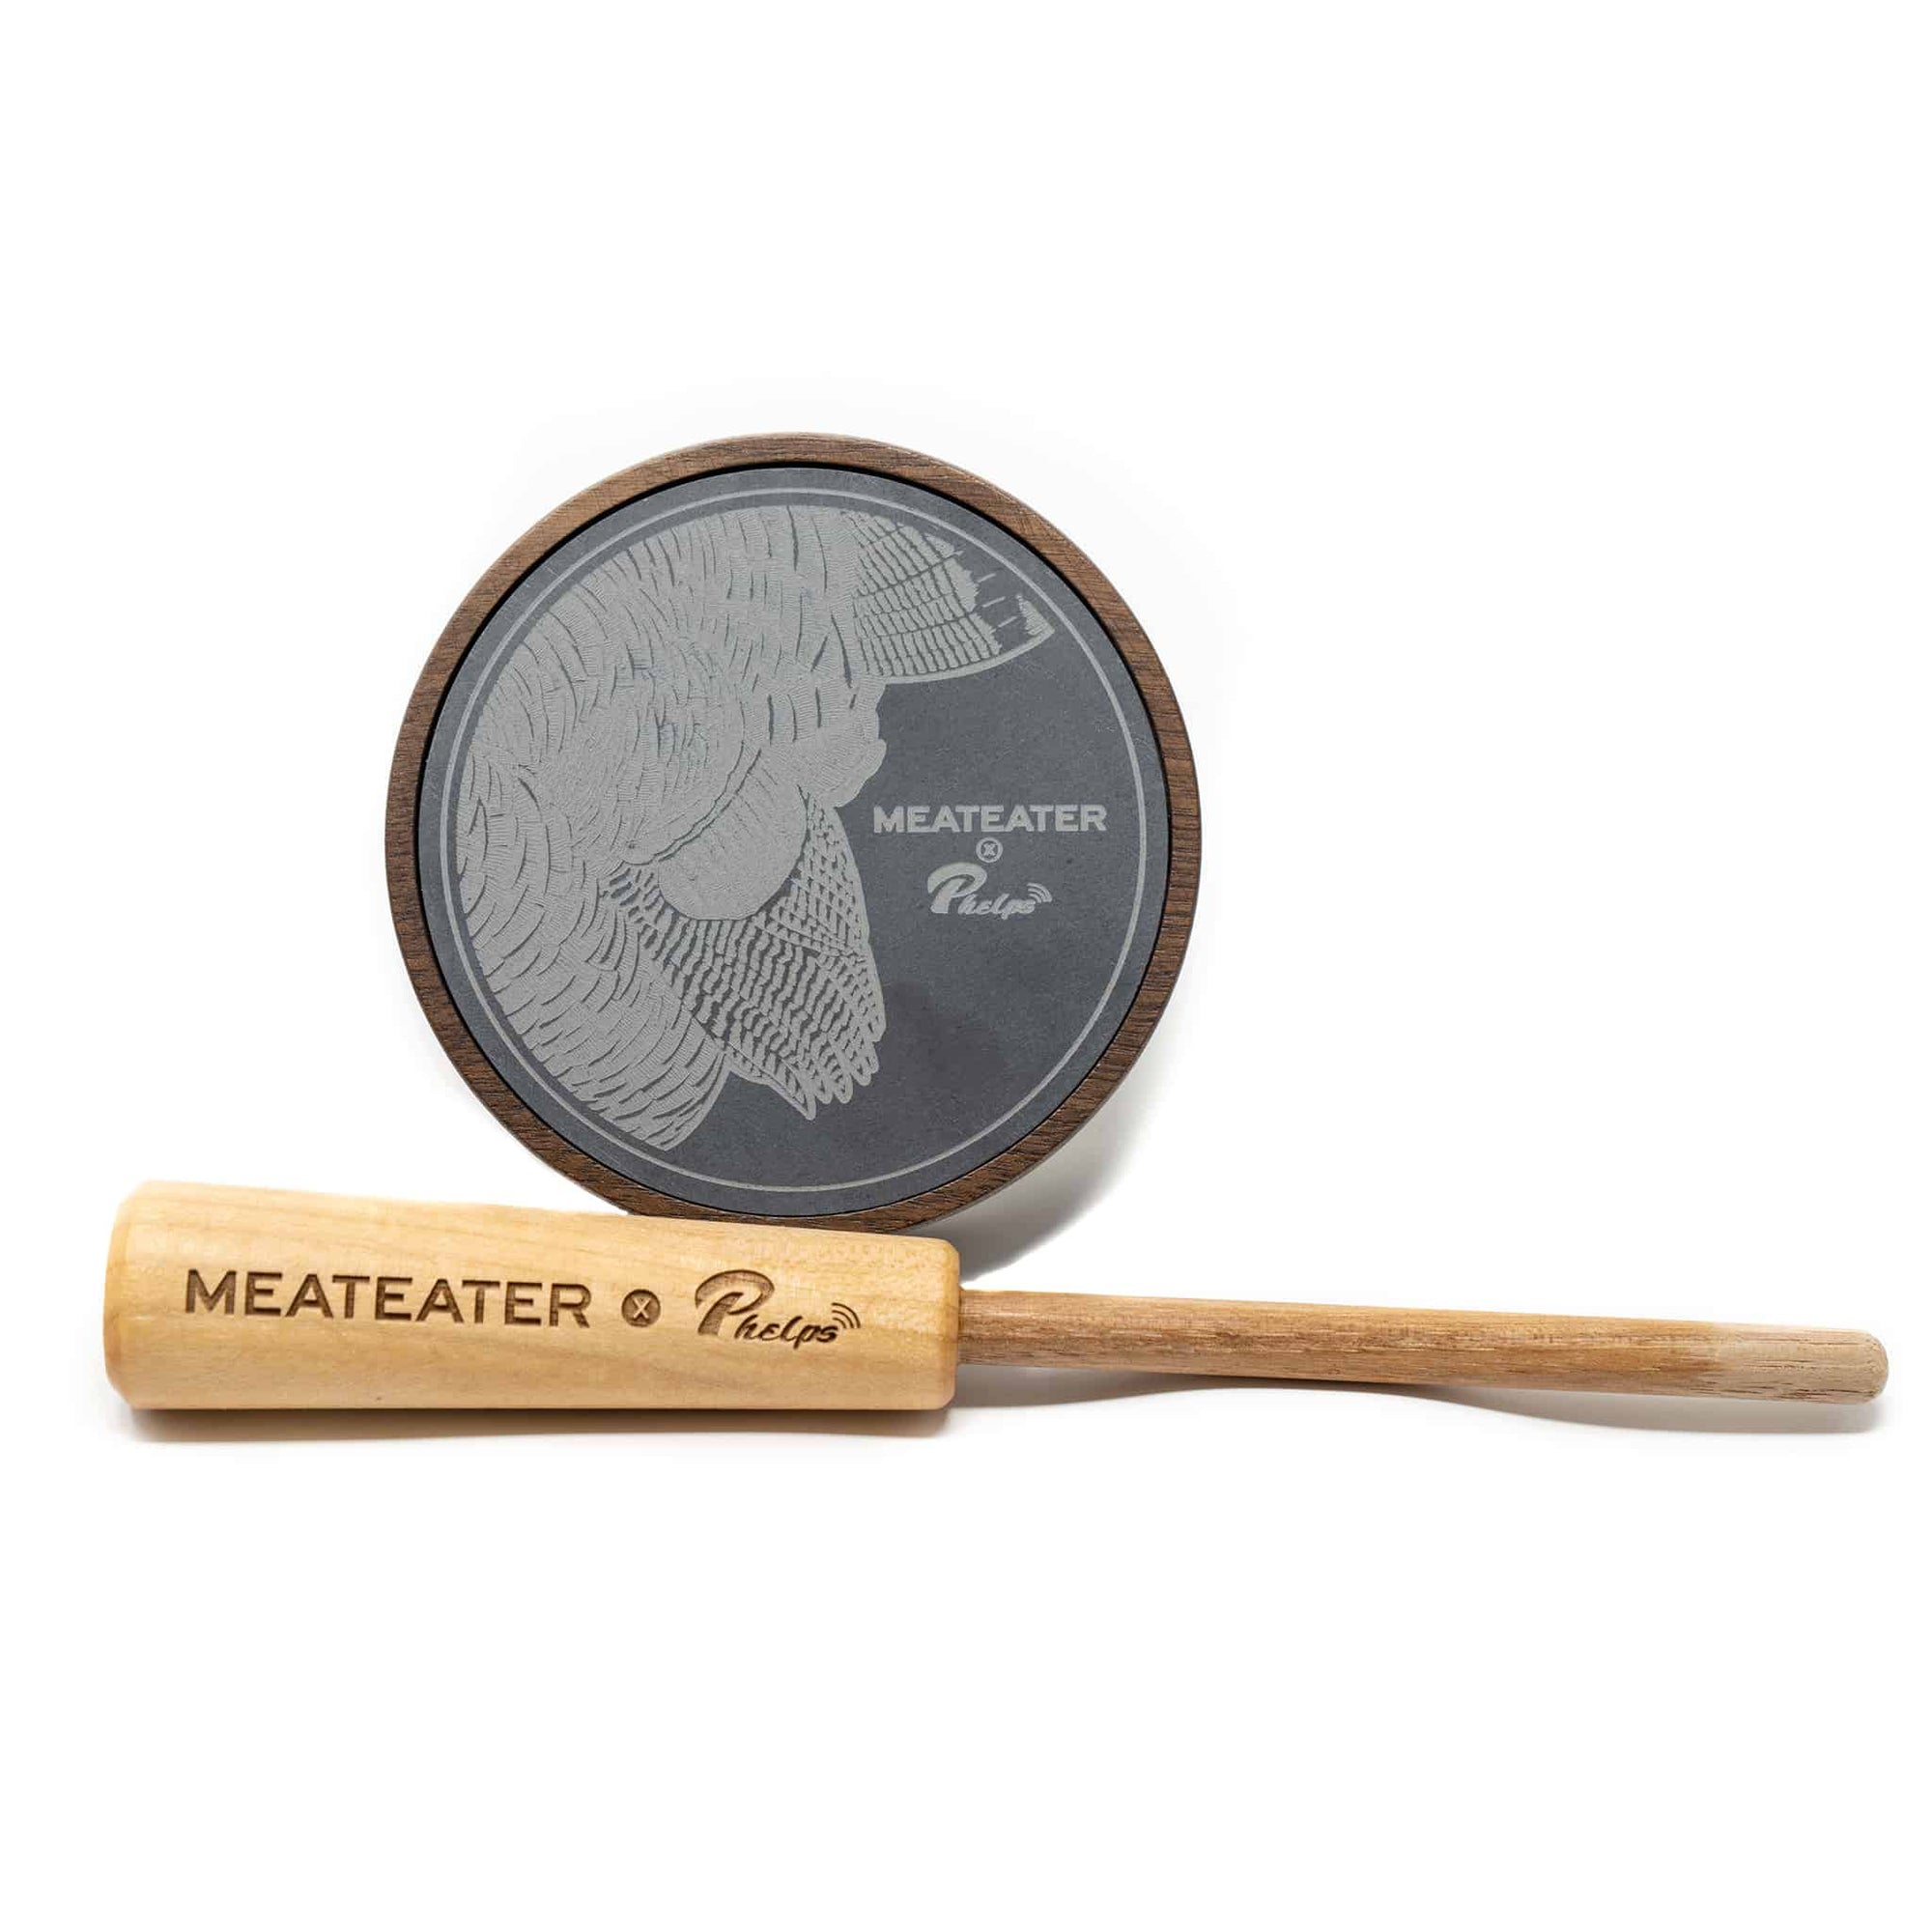 851182007550 meateater x phelps game calls slate over glass turkey pot call square